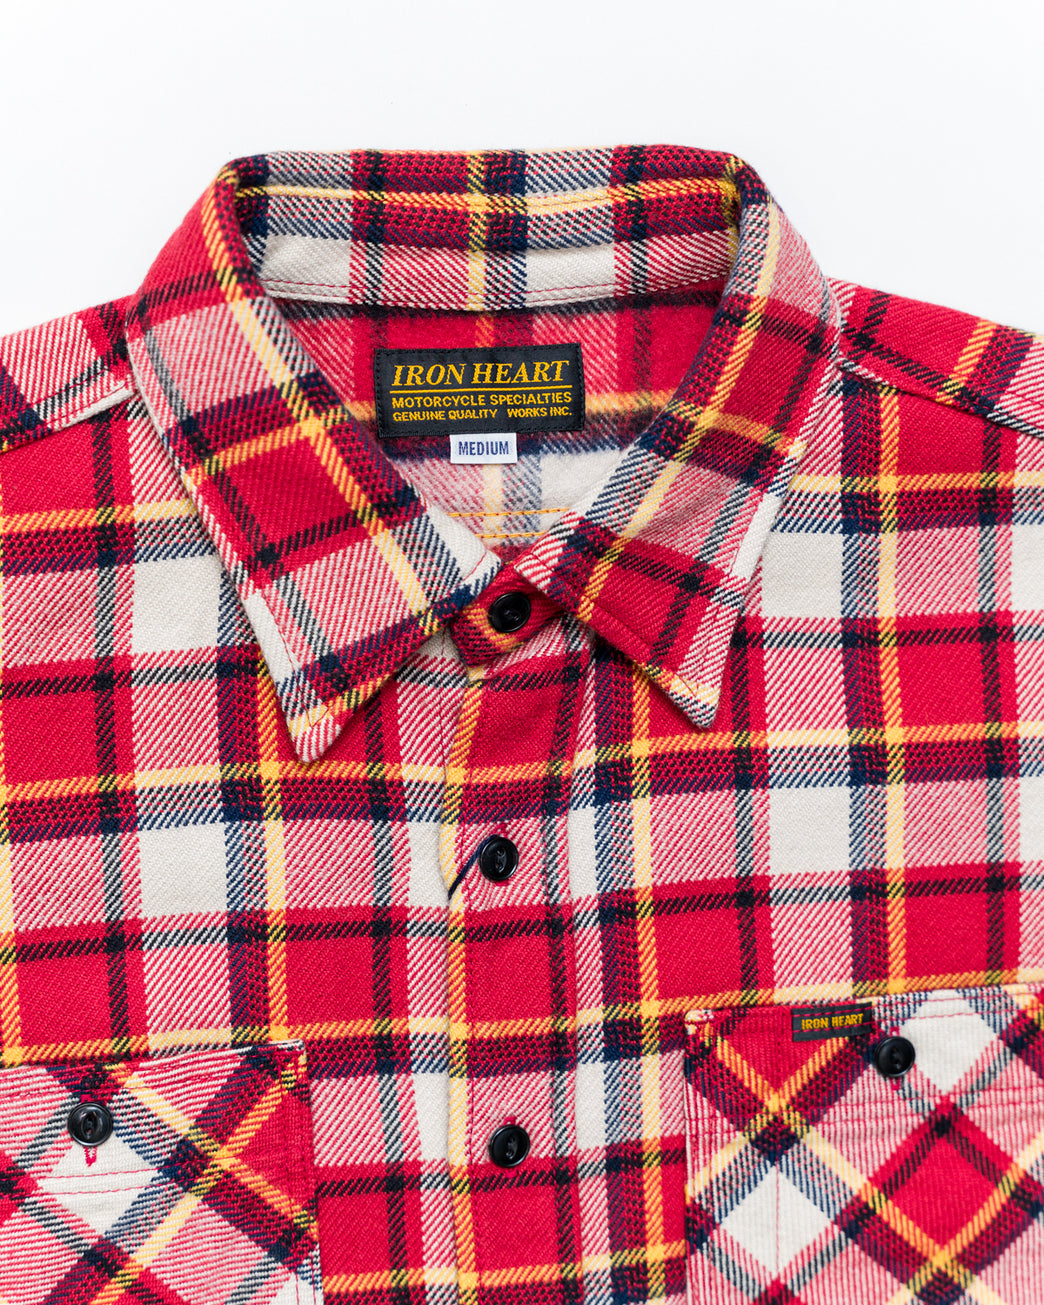 IHSH-334-RED - Ultra Heavy Flannel Classic Check Work Shirt - Red ...